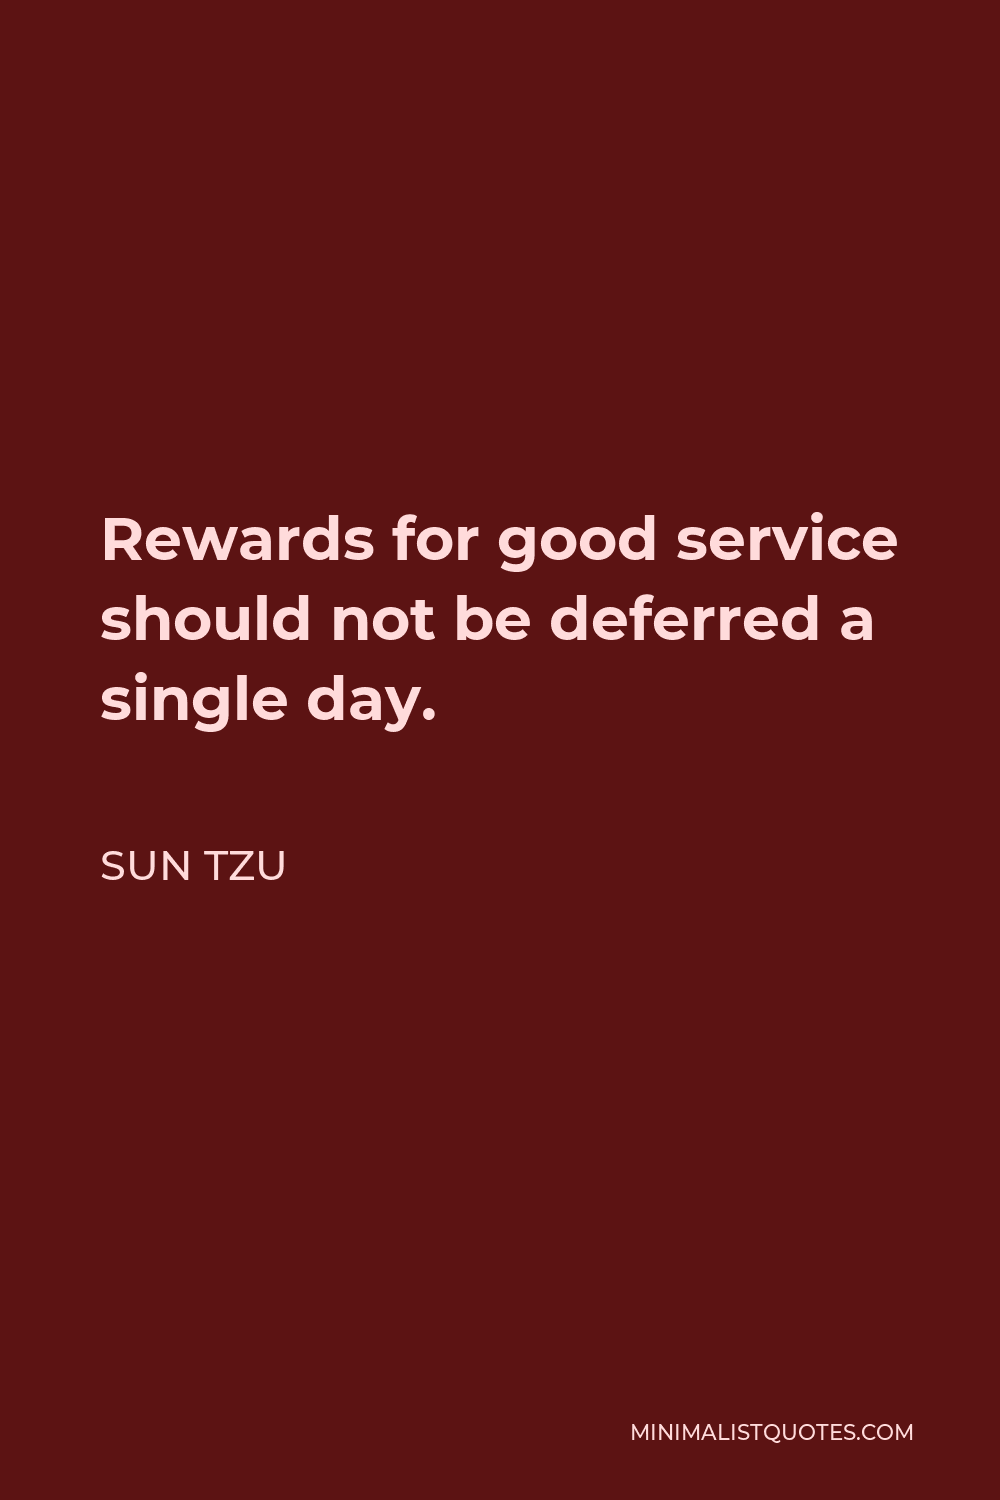 Sun Tzu Quote - Rewards for good service should not be deferred a single day.